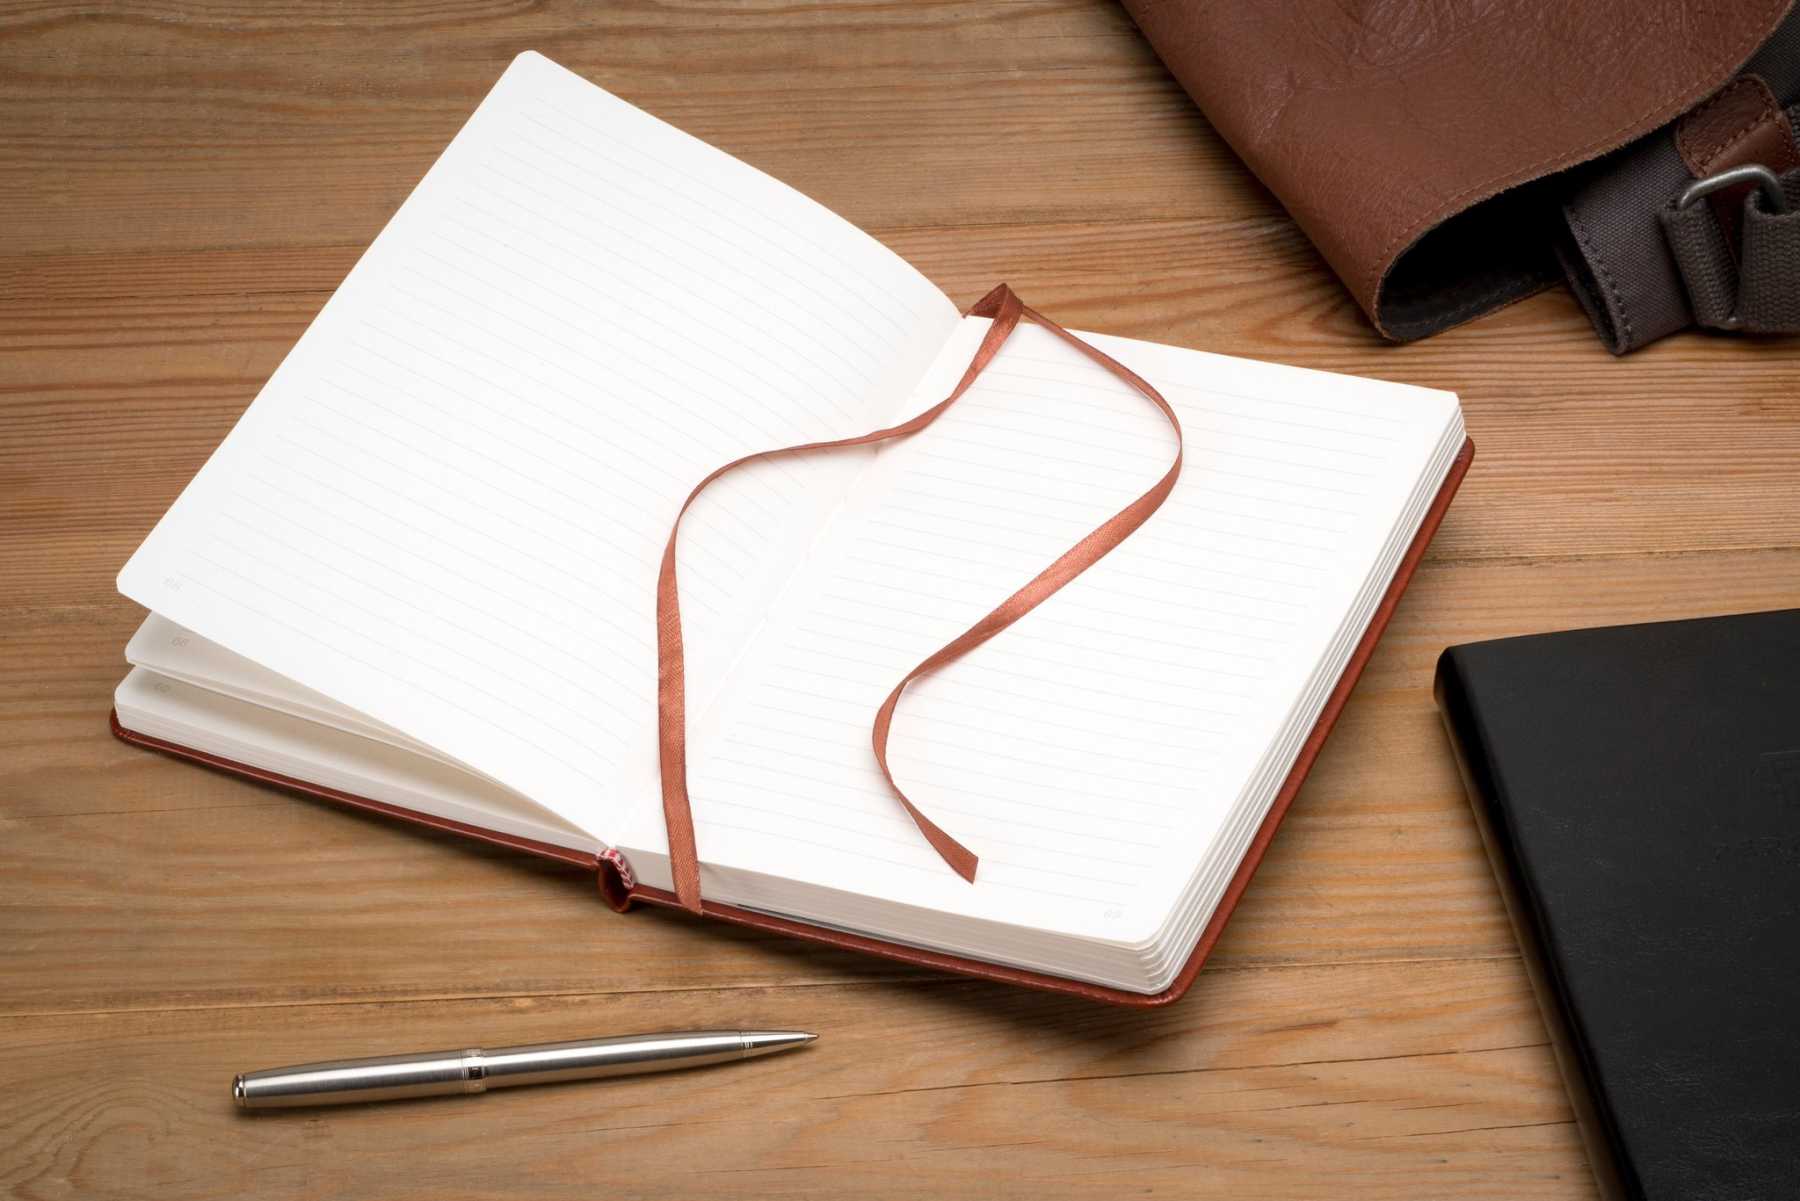 Easy Tips to Start Journaling with Any NotebookPerfectly Penned